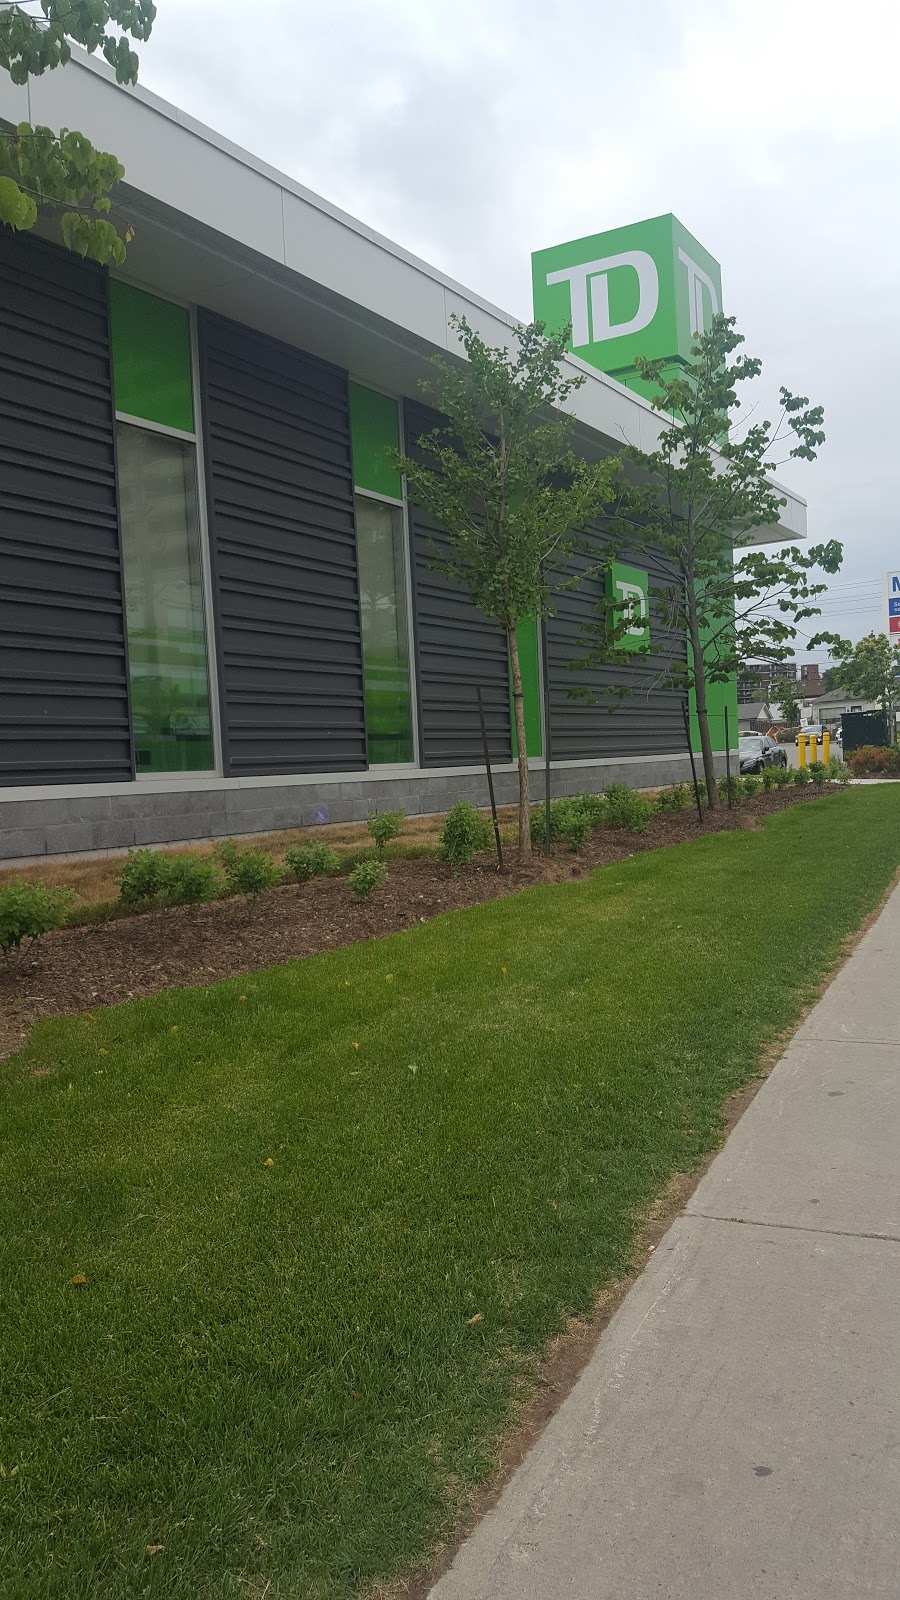 TD Canada Trust Branch and ATM | atm | 2547 Weston Rd, York, ON M9N 2A7, Canada | 4162478276 OR +1 416-247-8276